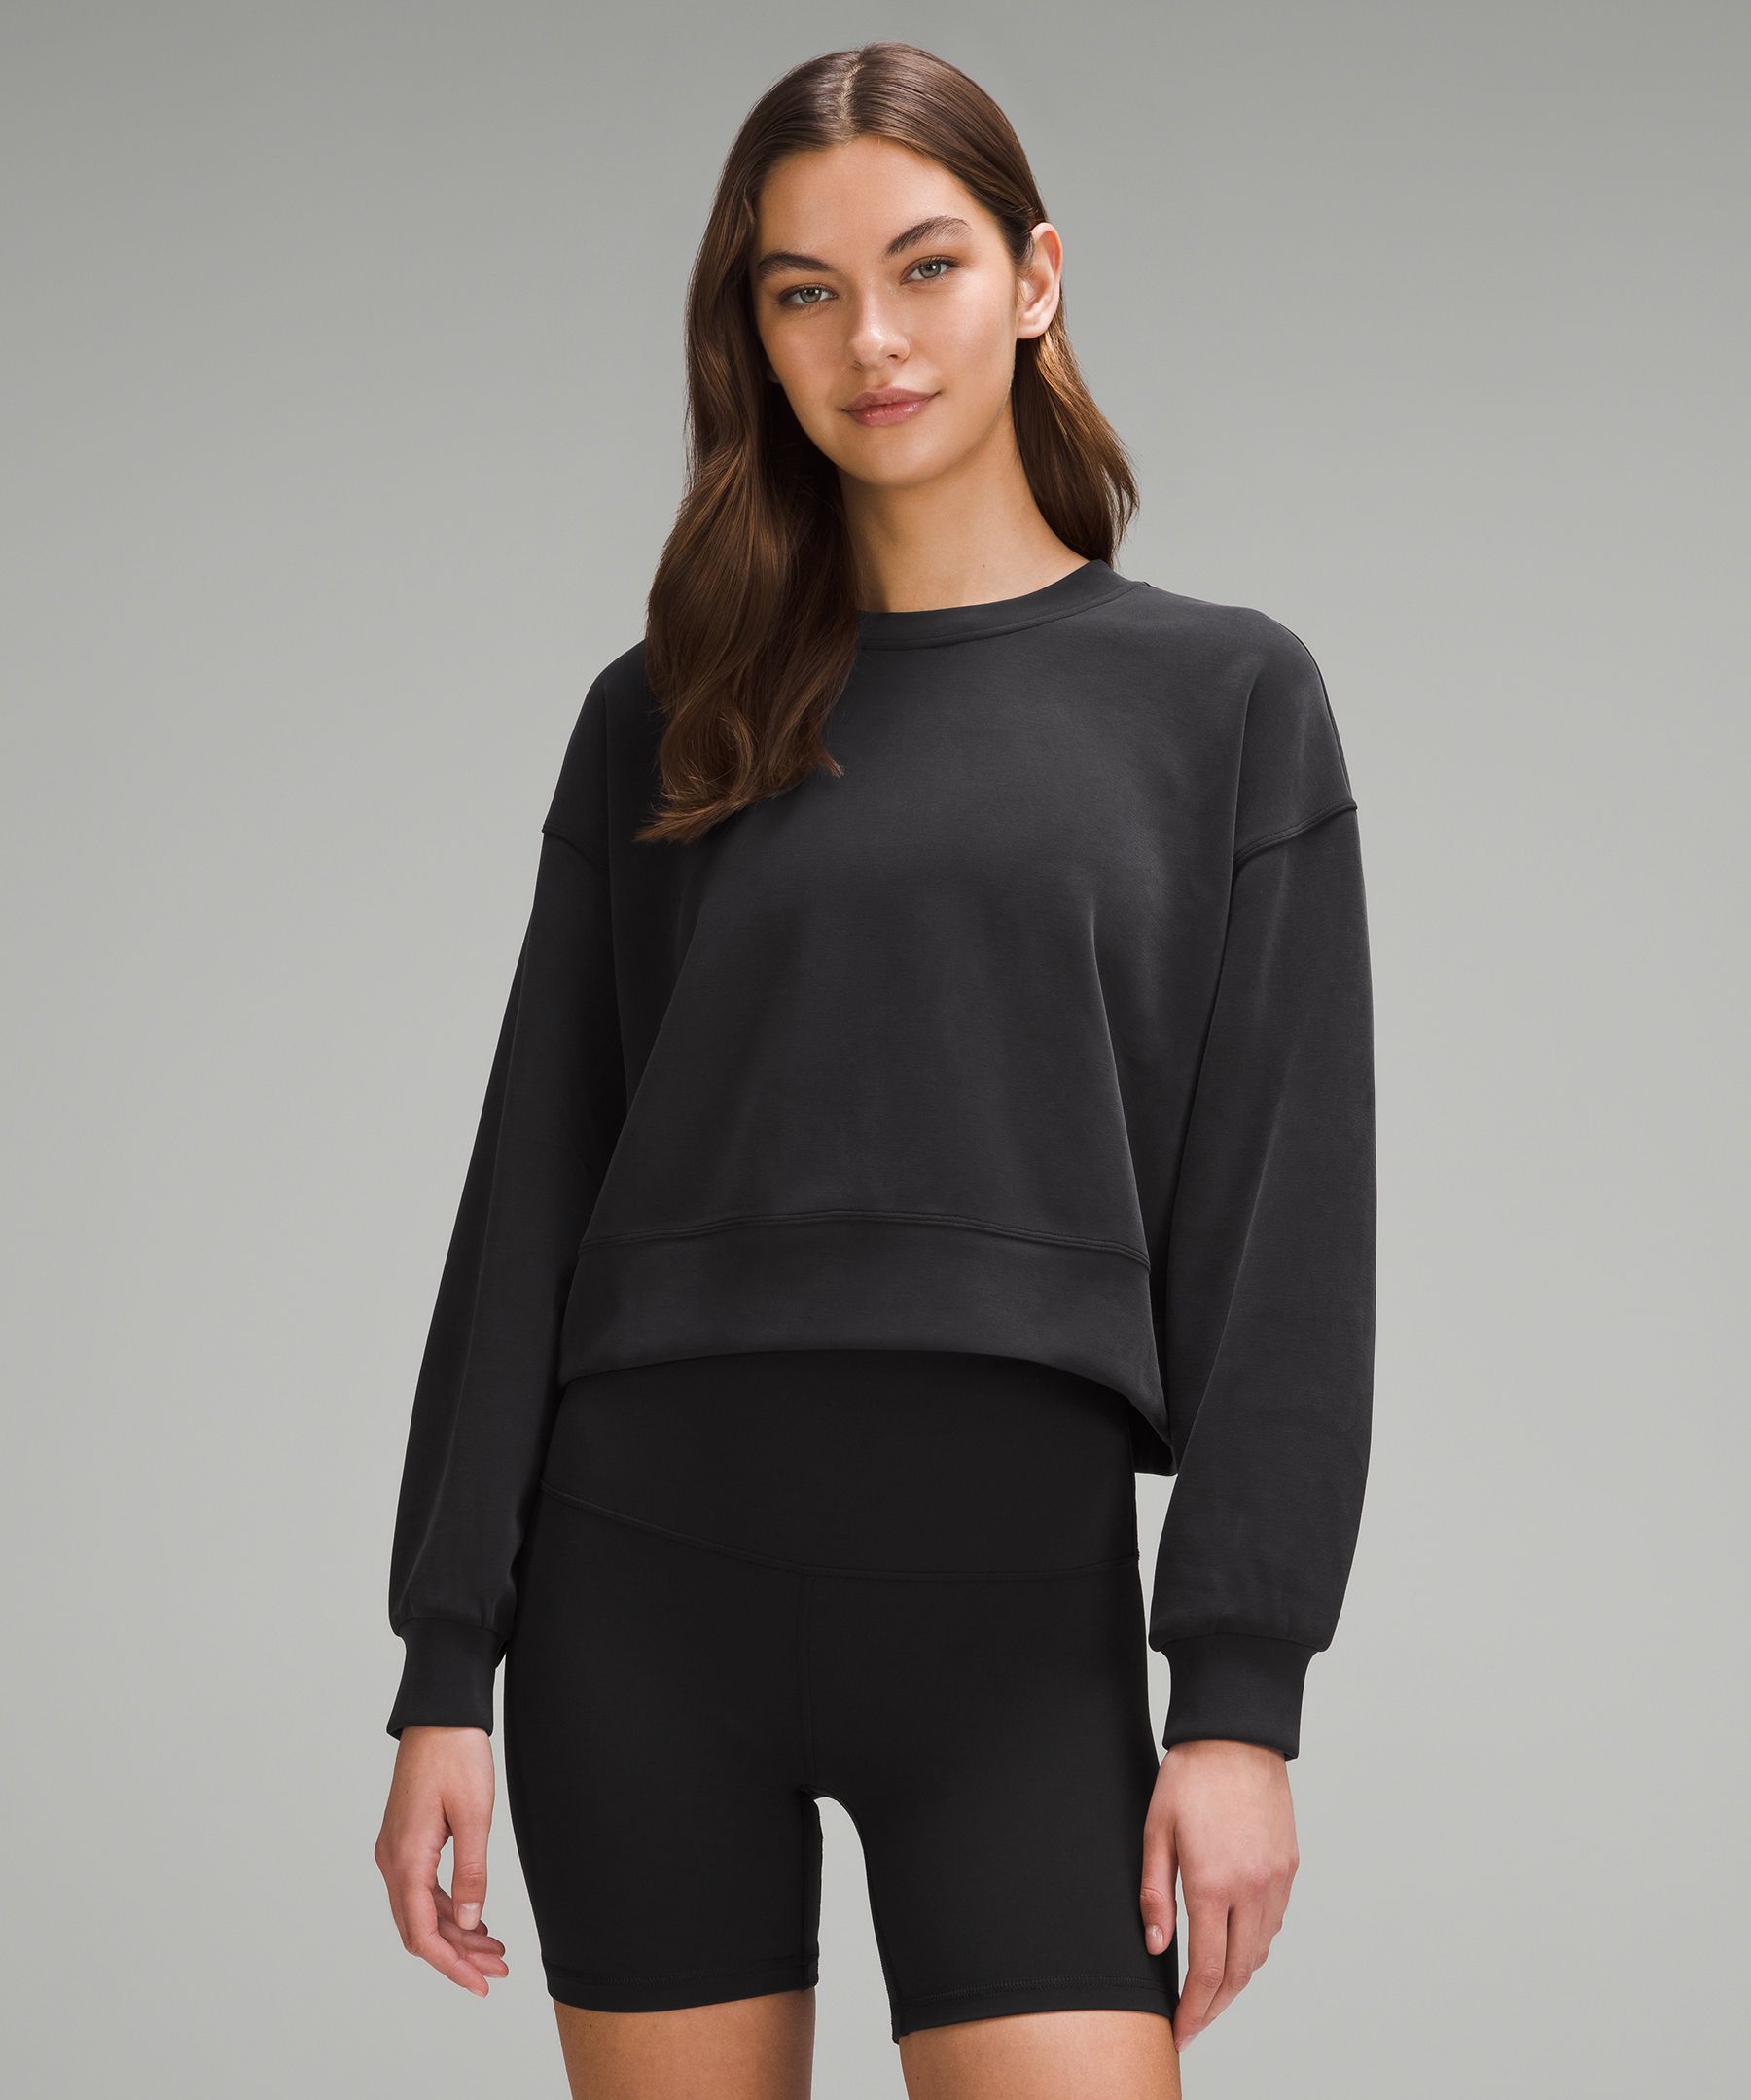 absolutely obsessed with this @lululemon shirt on WMTM!!! Softstreme G